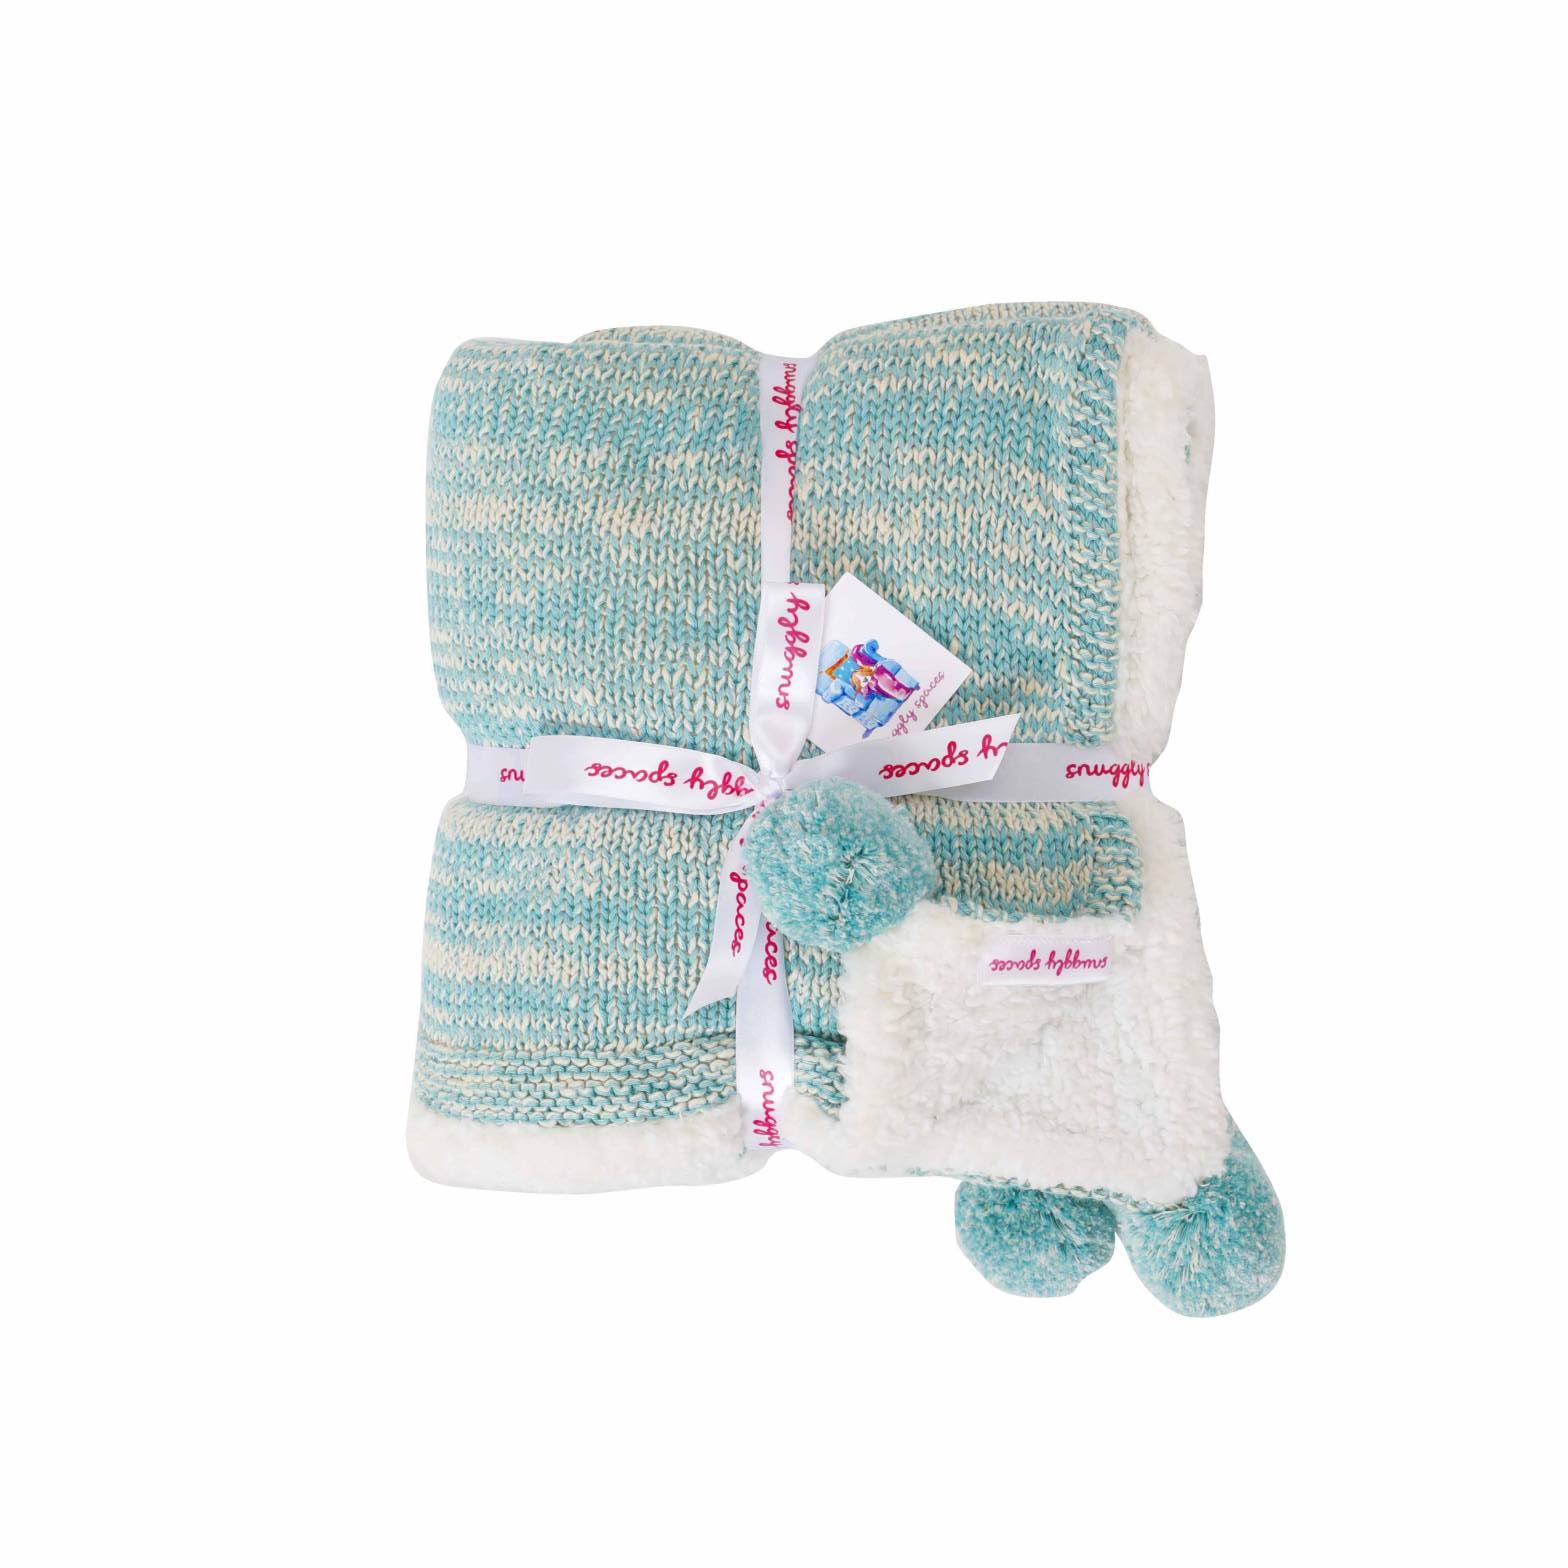 Snuggly Winter Knitted Blanket with Sherpa - Pearl Aqua